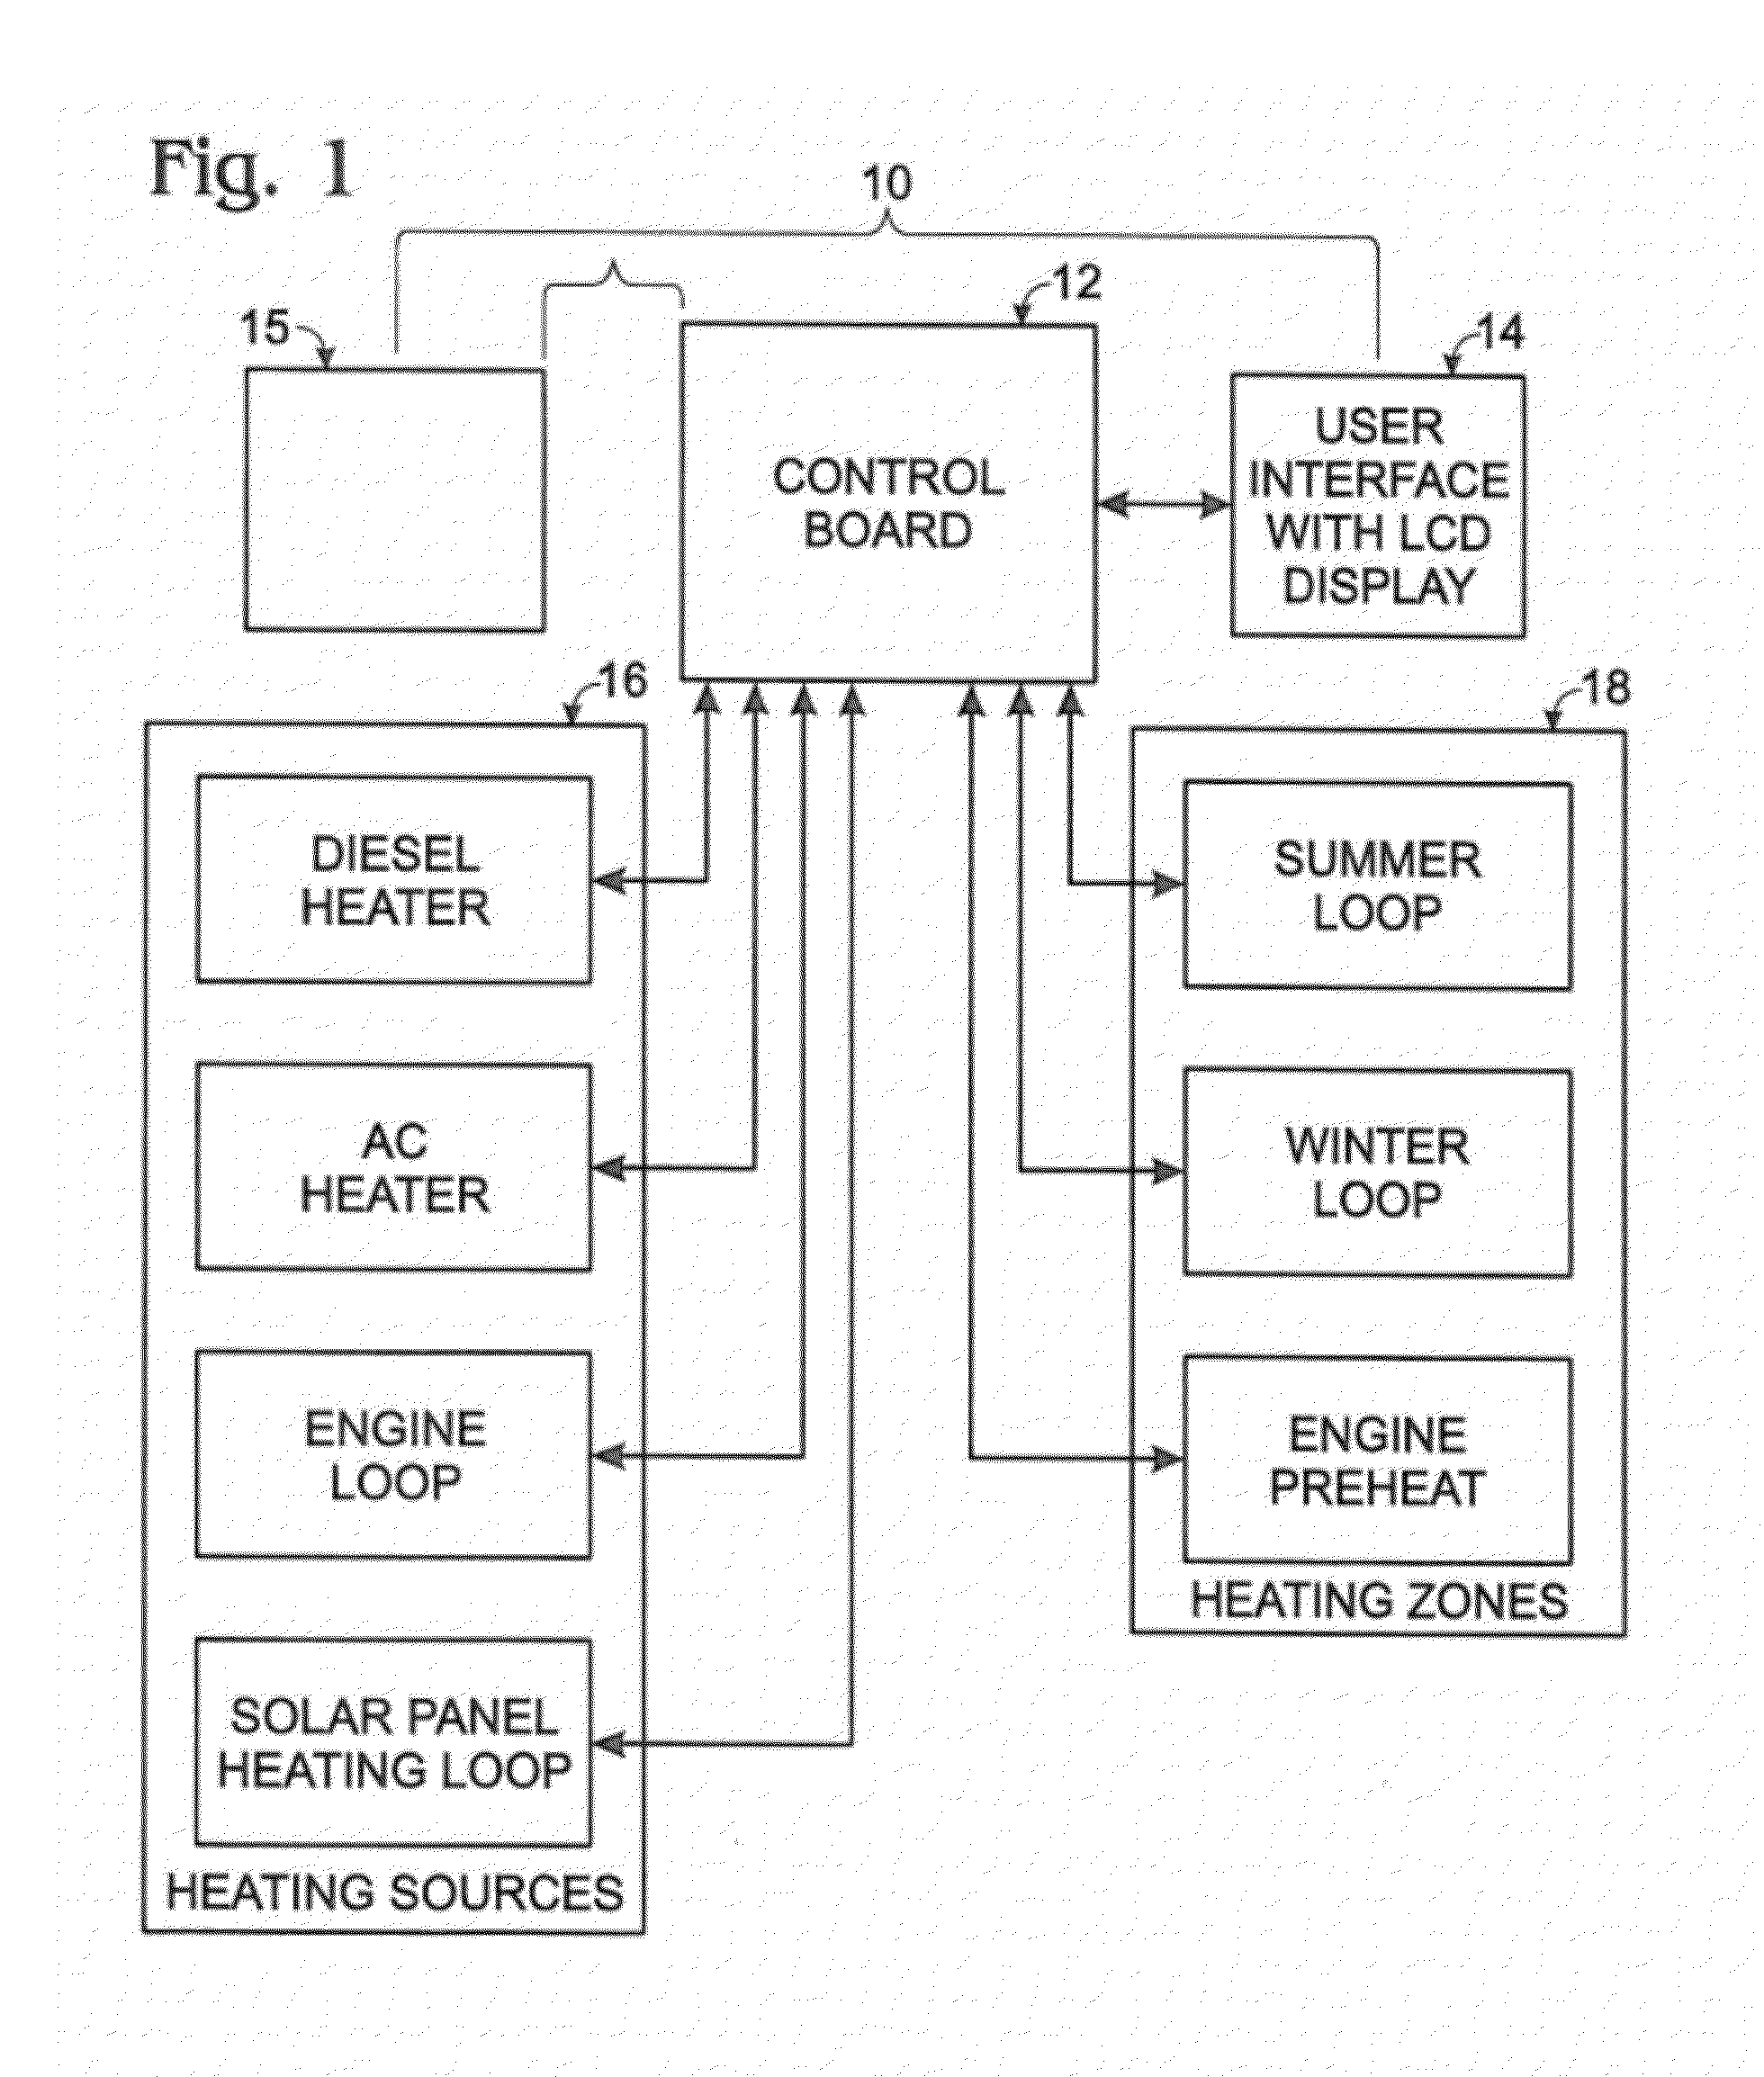 Controller for recreational-vehicle heating system